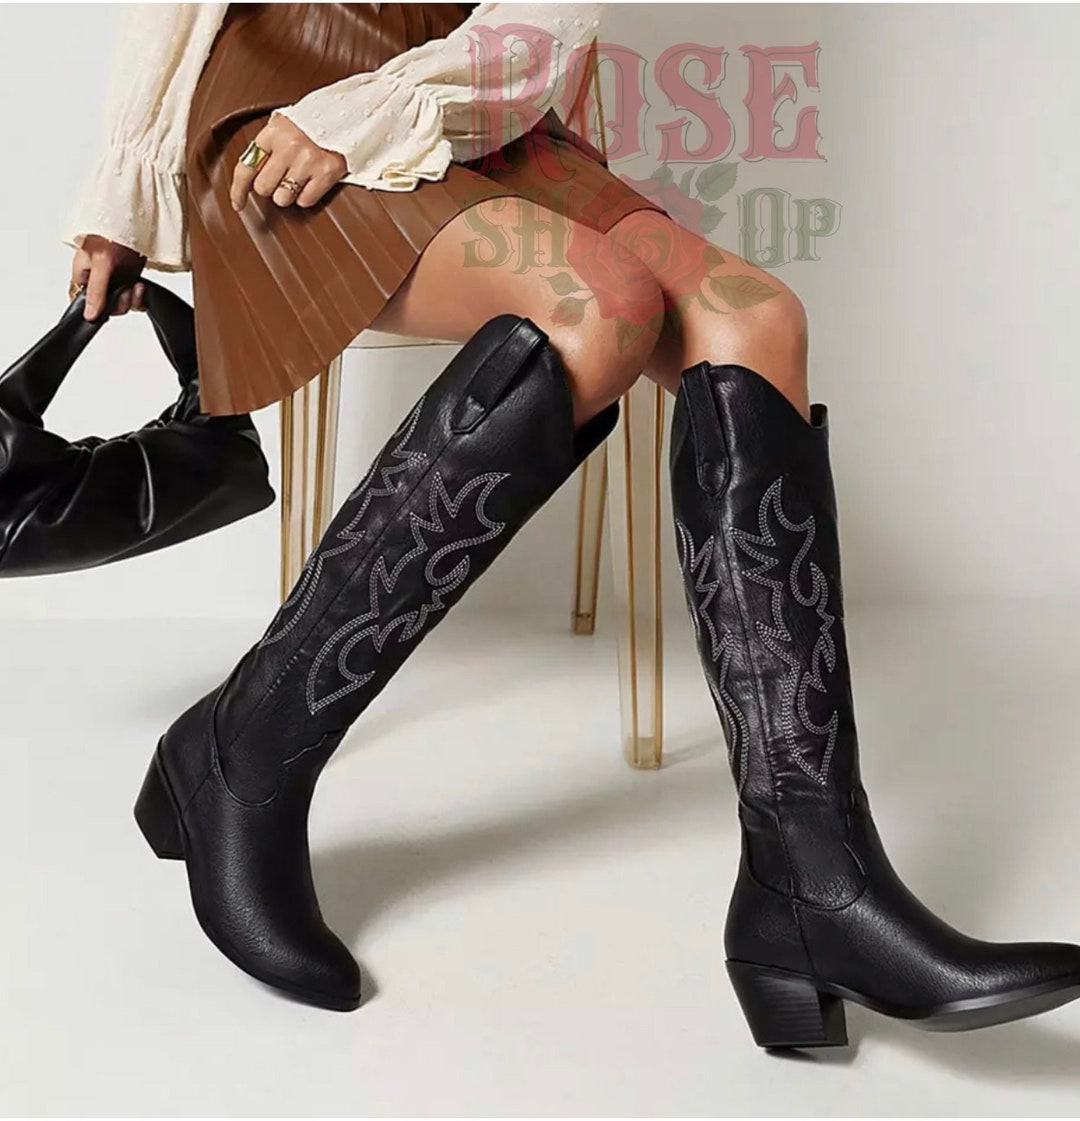 Cowboy Boots Cowgirl Boots Nashville Bachelorette Leather Boots Knee ...